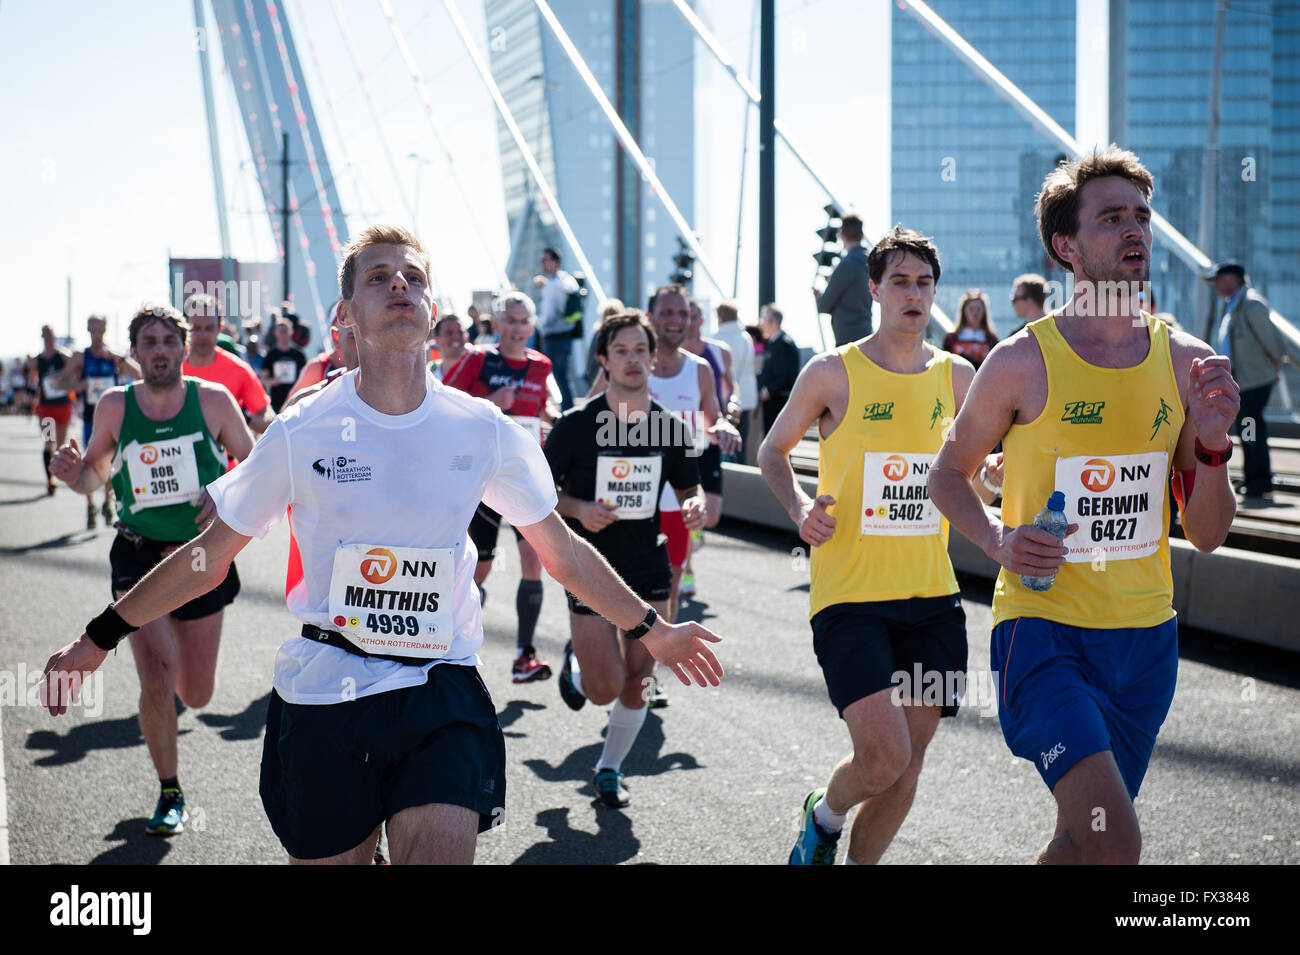 Rotterdam, The Netherlands. 10th Apr, 2016. Participants run on the Erasmus bridge during the Rotterdam Marathon, Kenyan Marius Kipserem won the race in personal best 2 hours, 06 minutes and 10 seconds edging out last year's winner Ethiopian Solomon Deksisa. In the women’s contest, Sutume Asefa Kebede went out fast, covering the first 5km in 16:53, a massive 46 seconds ahead of her pursuers and on 2:18 pace. But disaster struck the leader after 30km when she was hit with stitch. Credit:  Romy Arroyo Fernandez/Alamy Live News Stock Photo